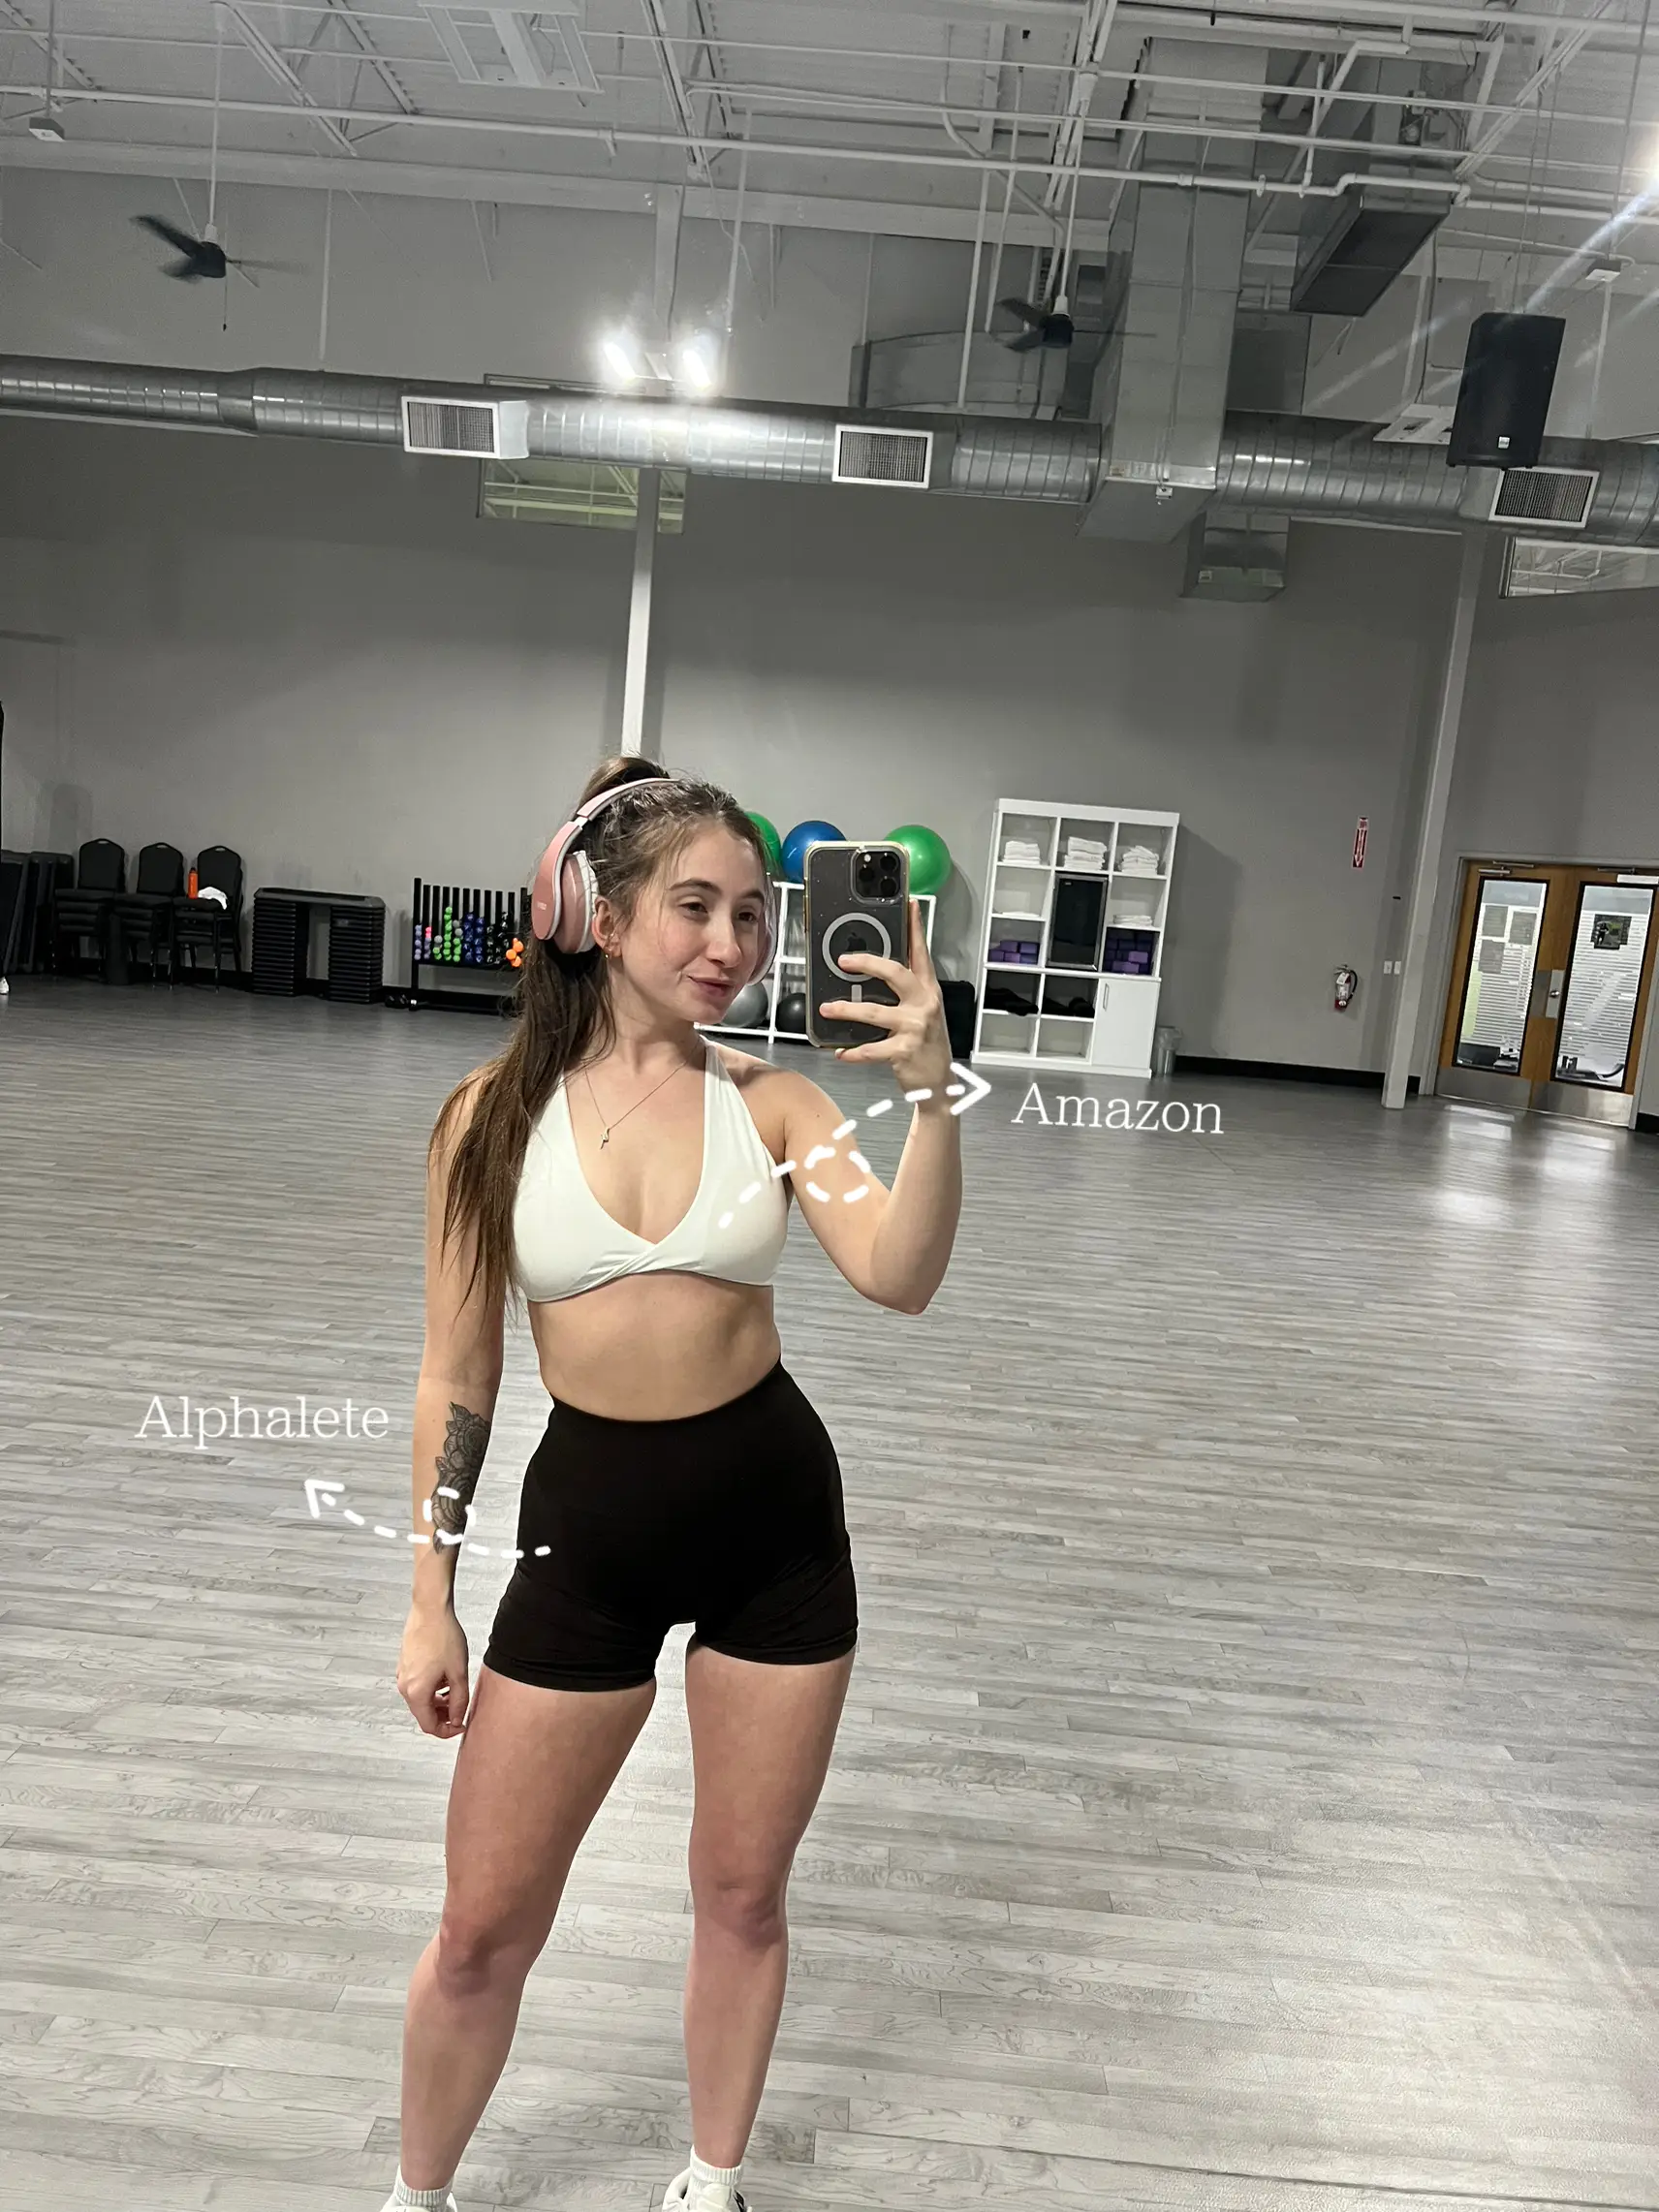 Gym outfit ideas, Gallery posted by Makenziewilkens